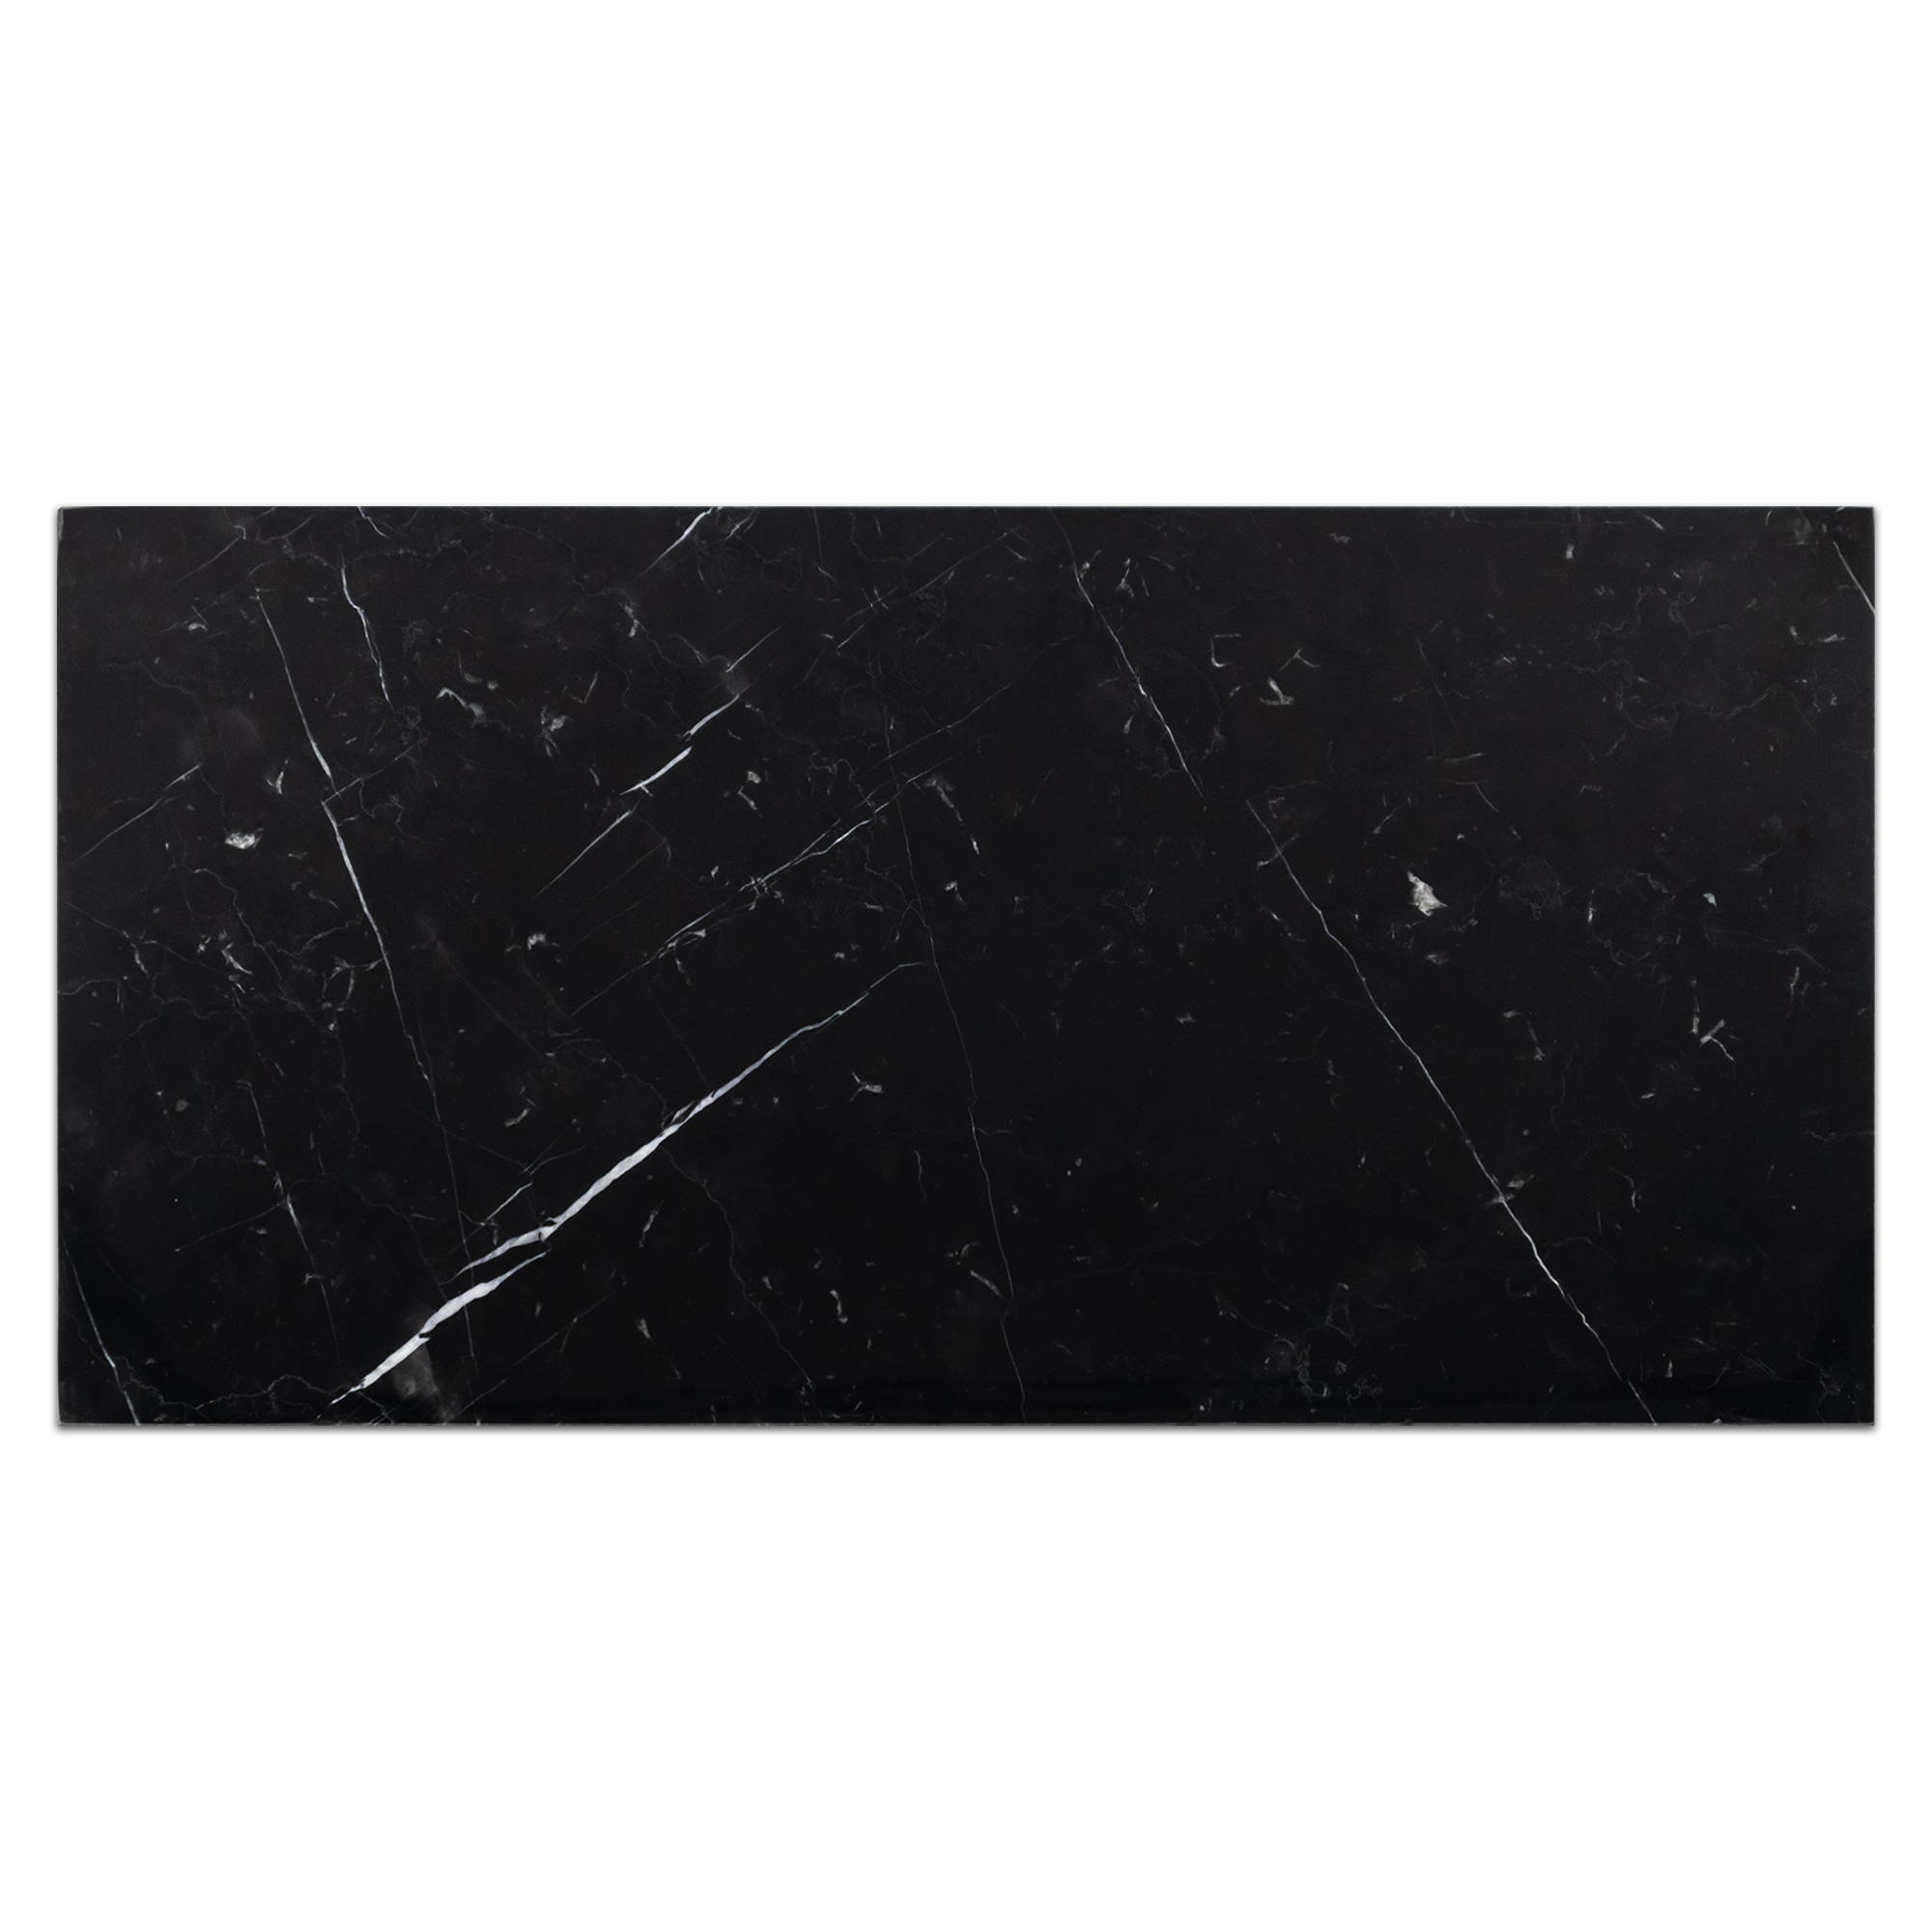 Elon black marble rectangle field tile 12x24x0.375 polished AM7075P Surface Group International product